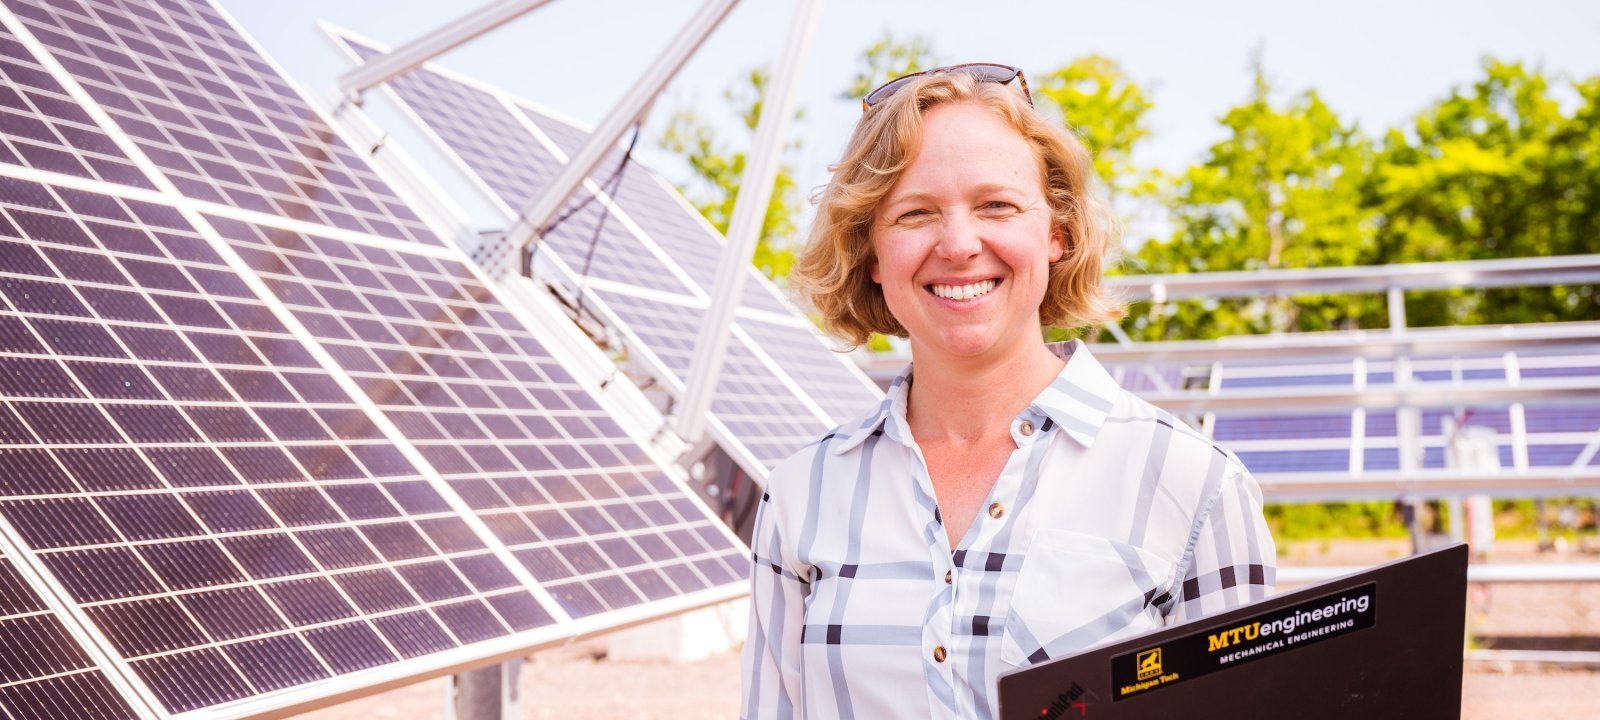 Ana Dyreson doing field research with solar power.